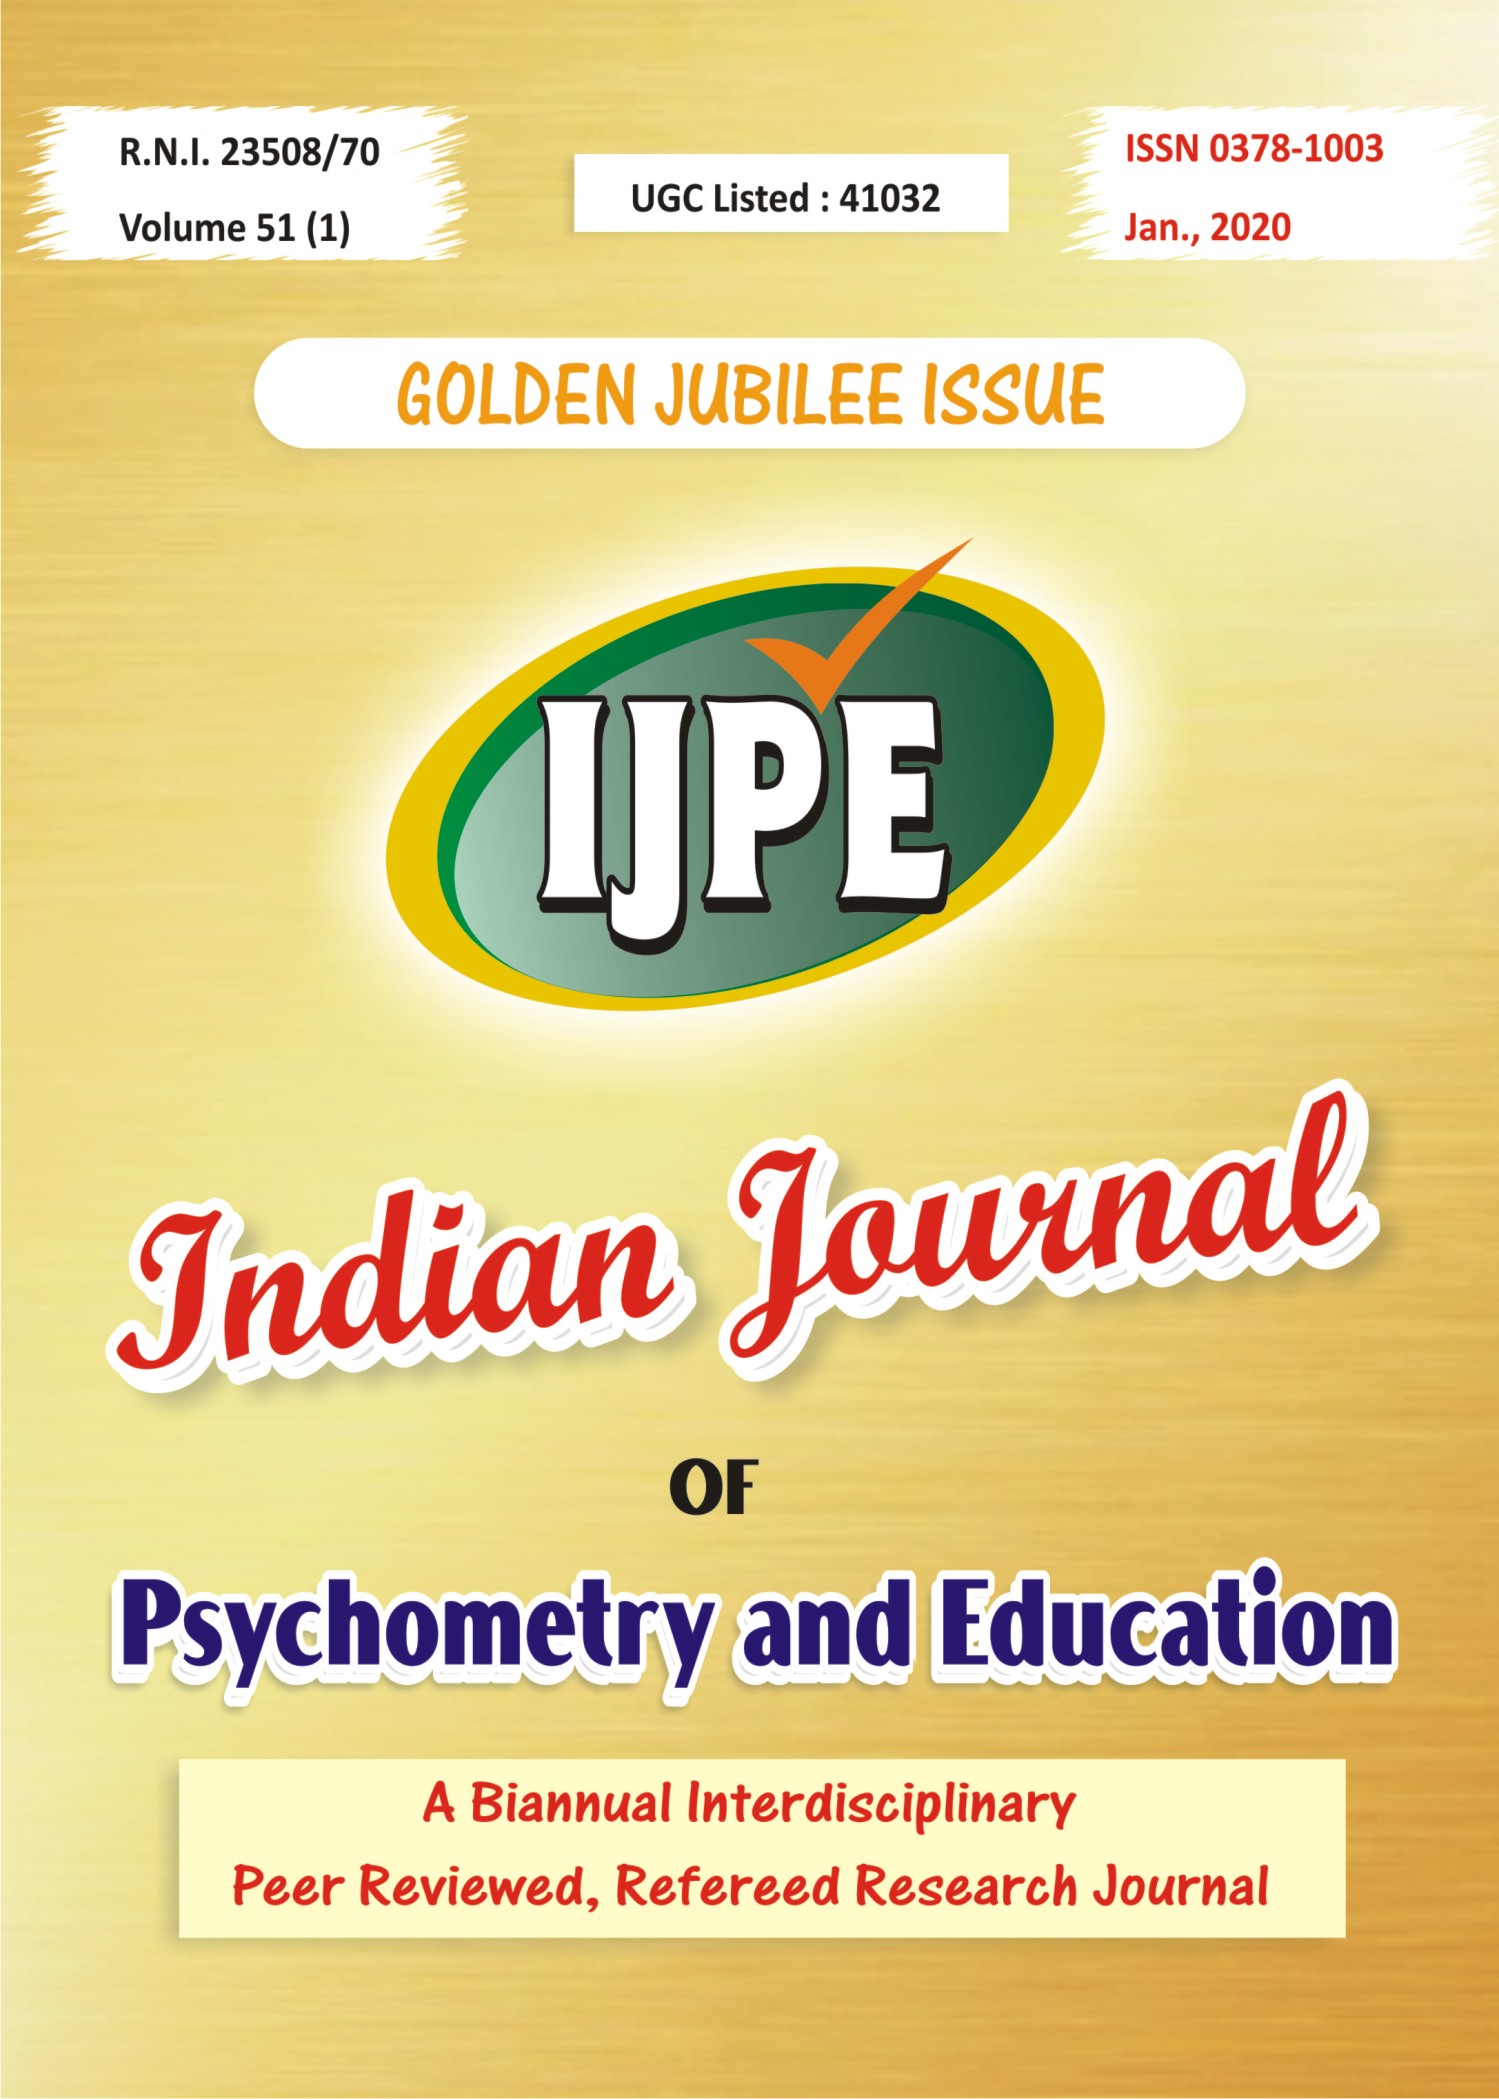 INDIAN-JOURNAL-OF-PSYCHOMETRY-AND-EDUCATION